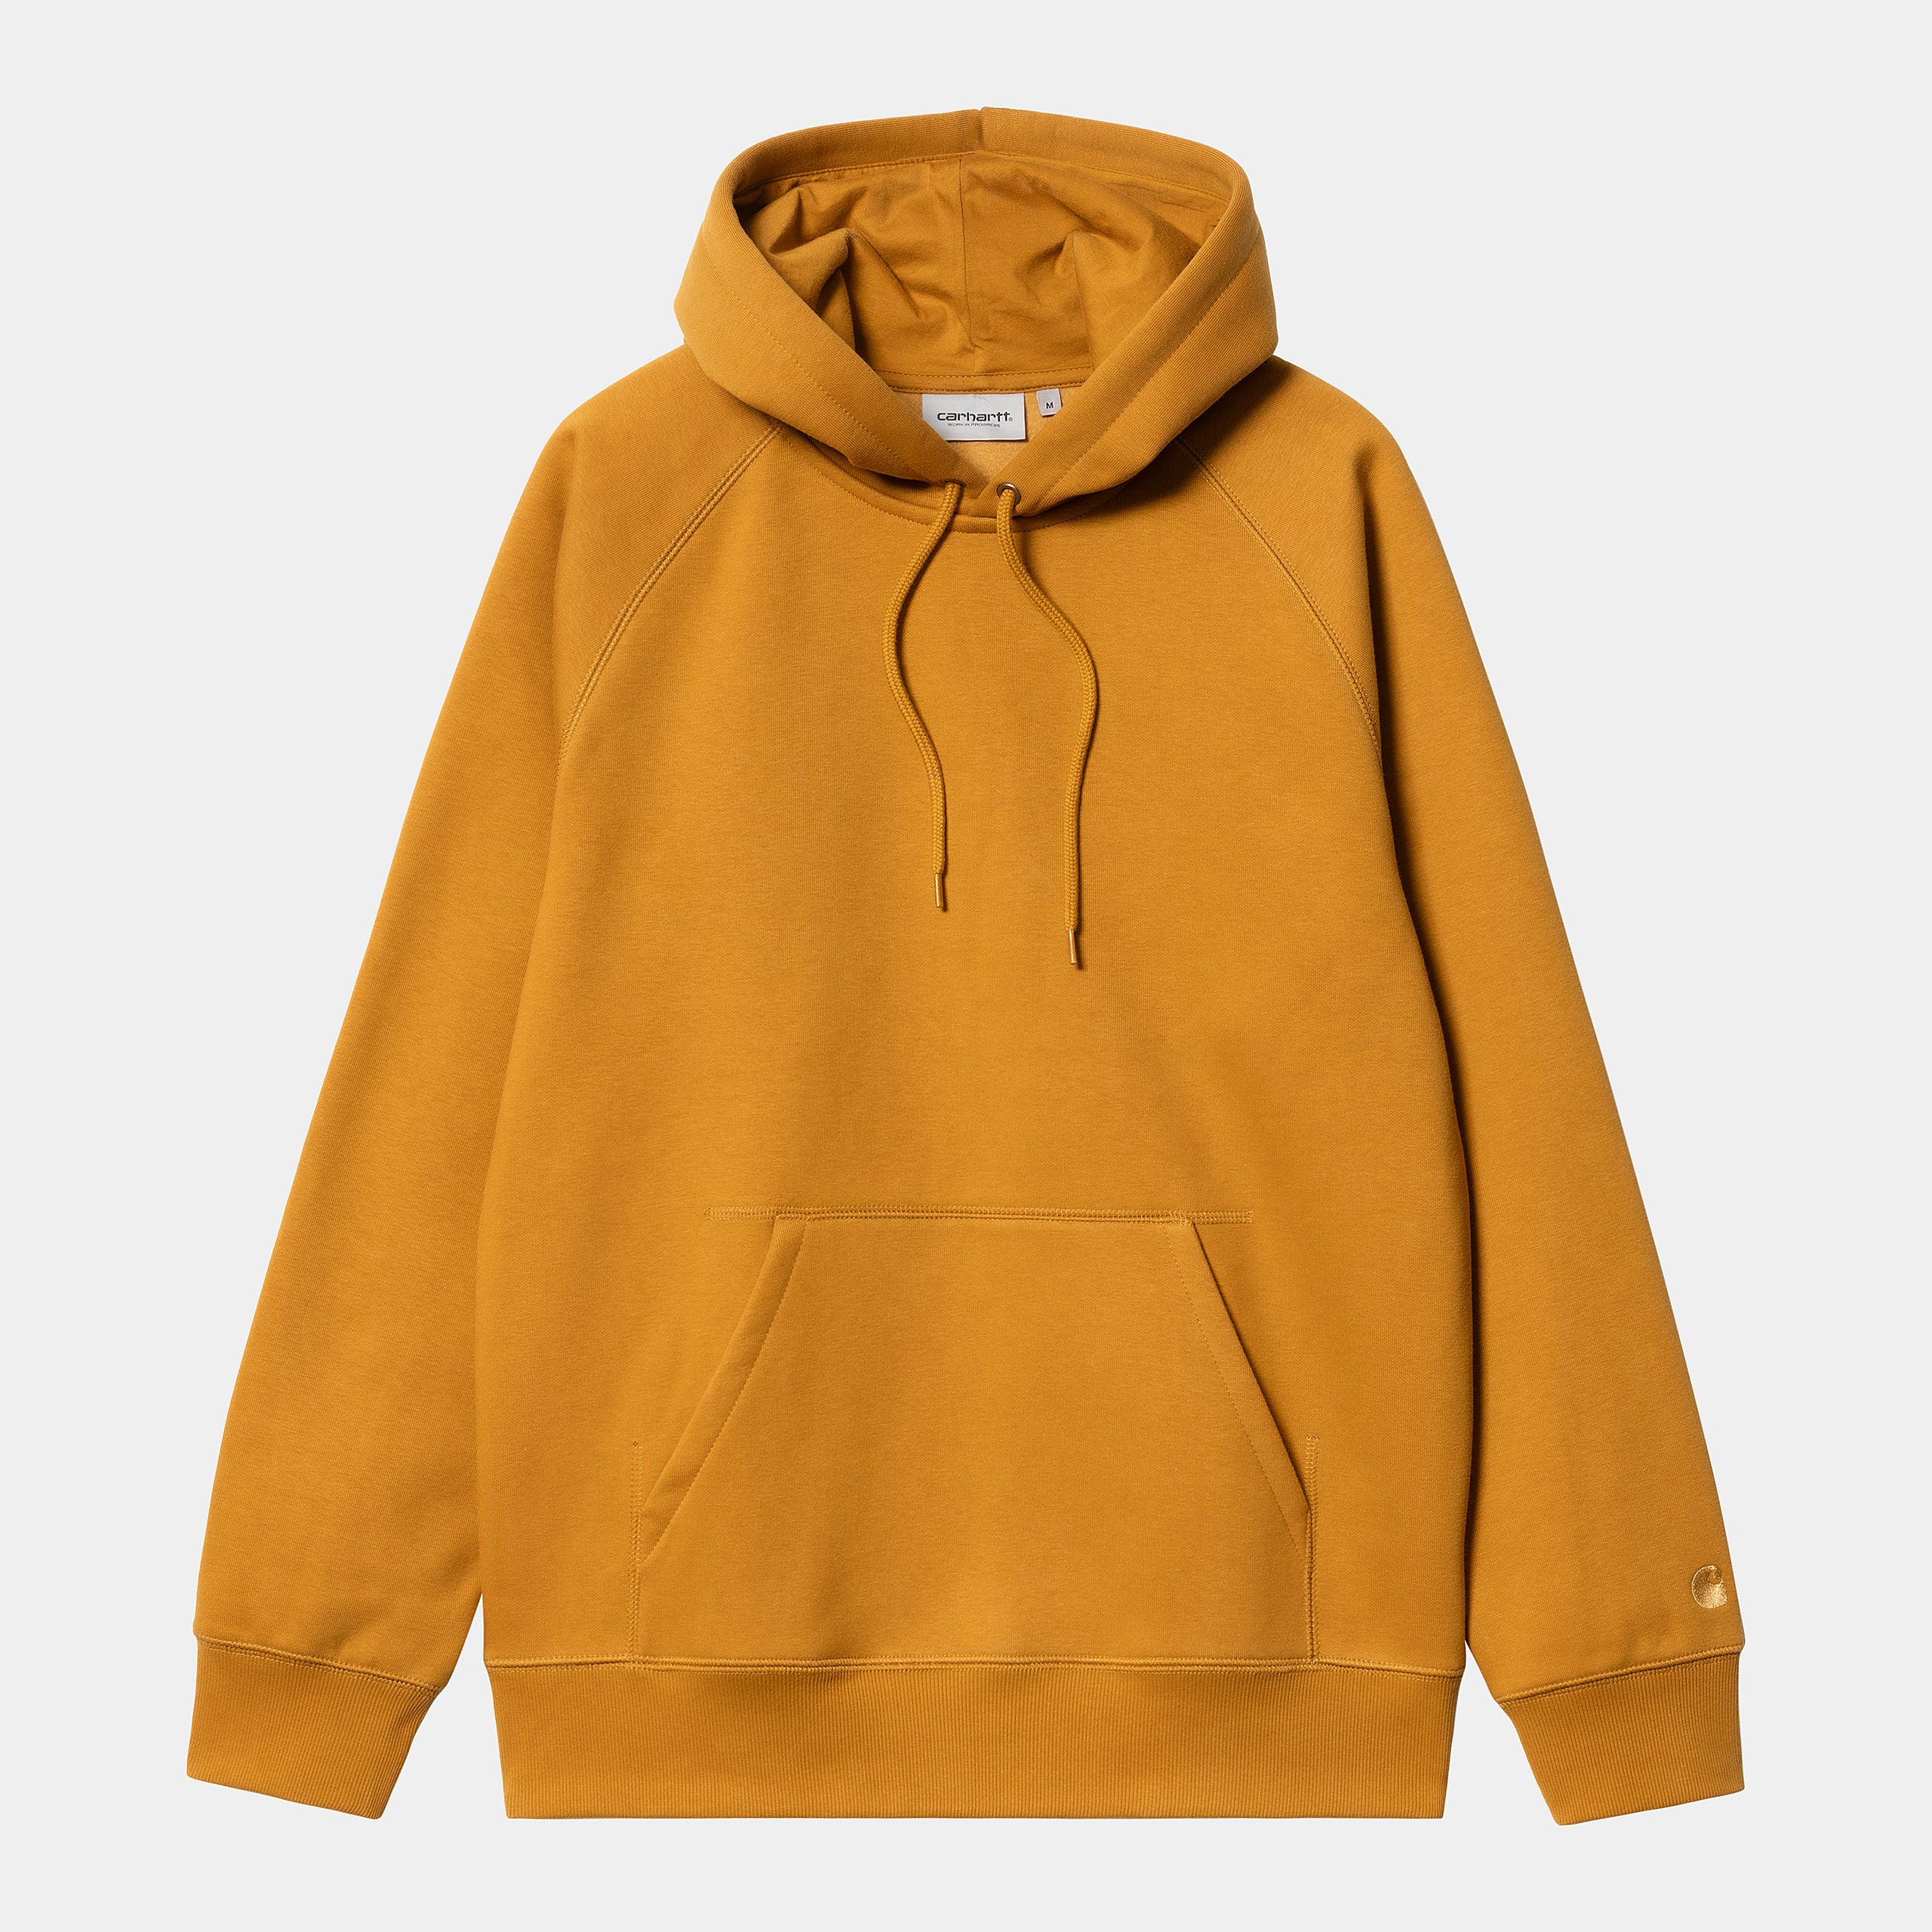 Carhartt WIP Hooded Chase Sweat Buckthorn/Gold M L XL